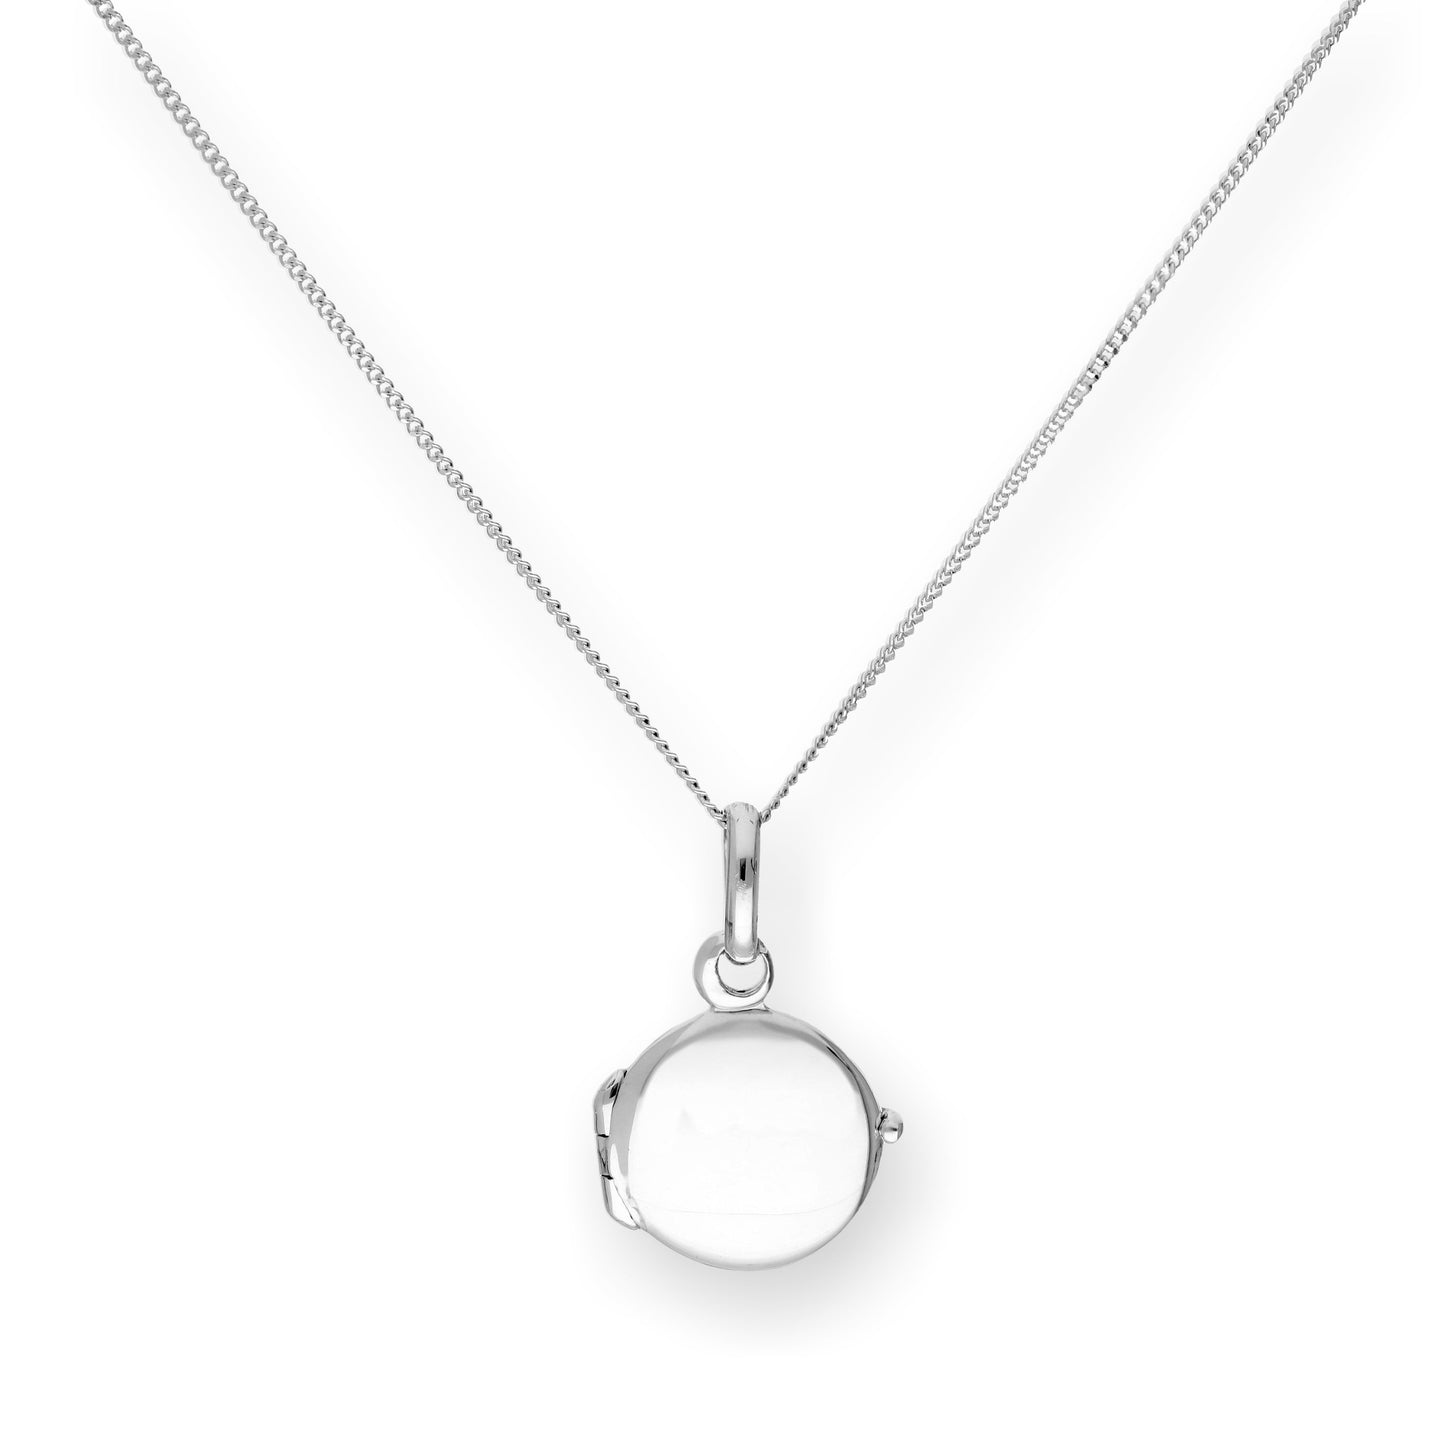 Tiny Sterling Silver Engravable Round Locket on Chain 16 - 22 Inches